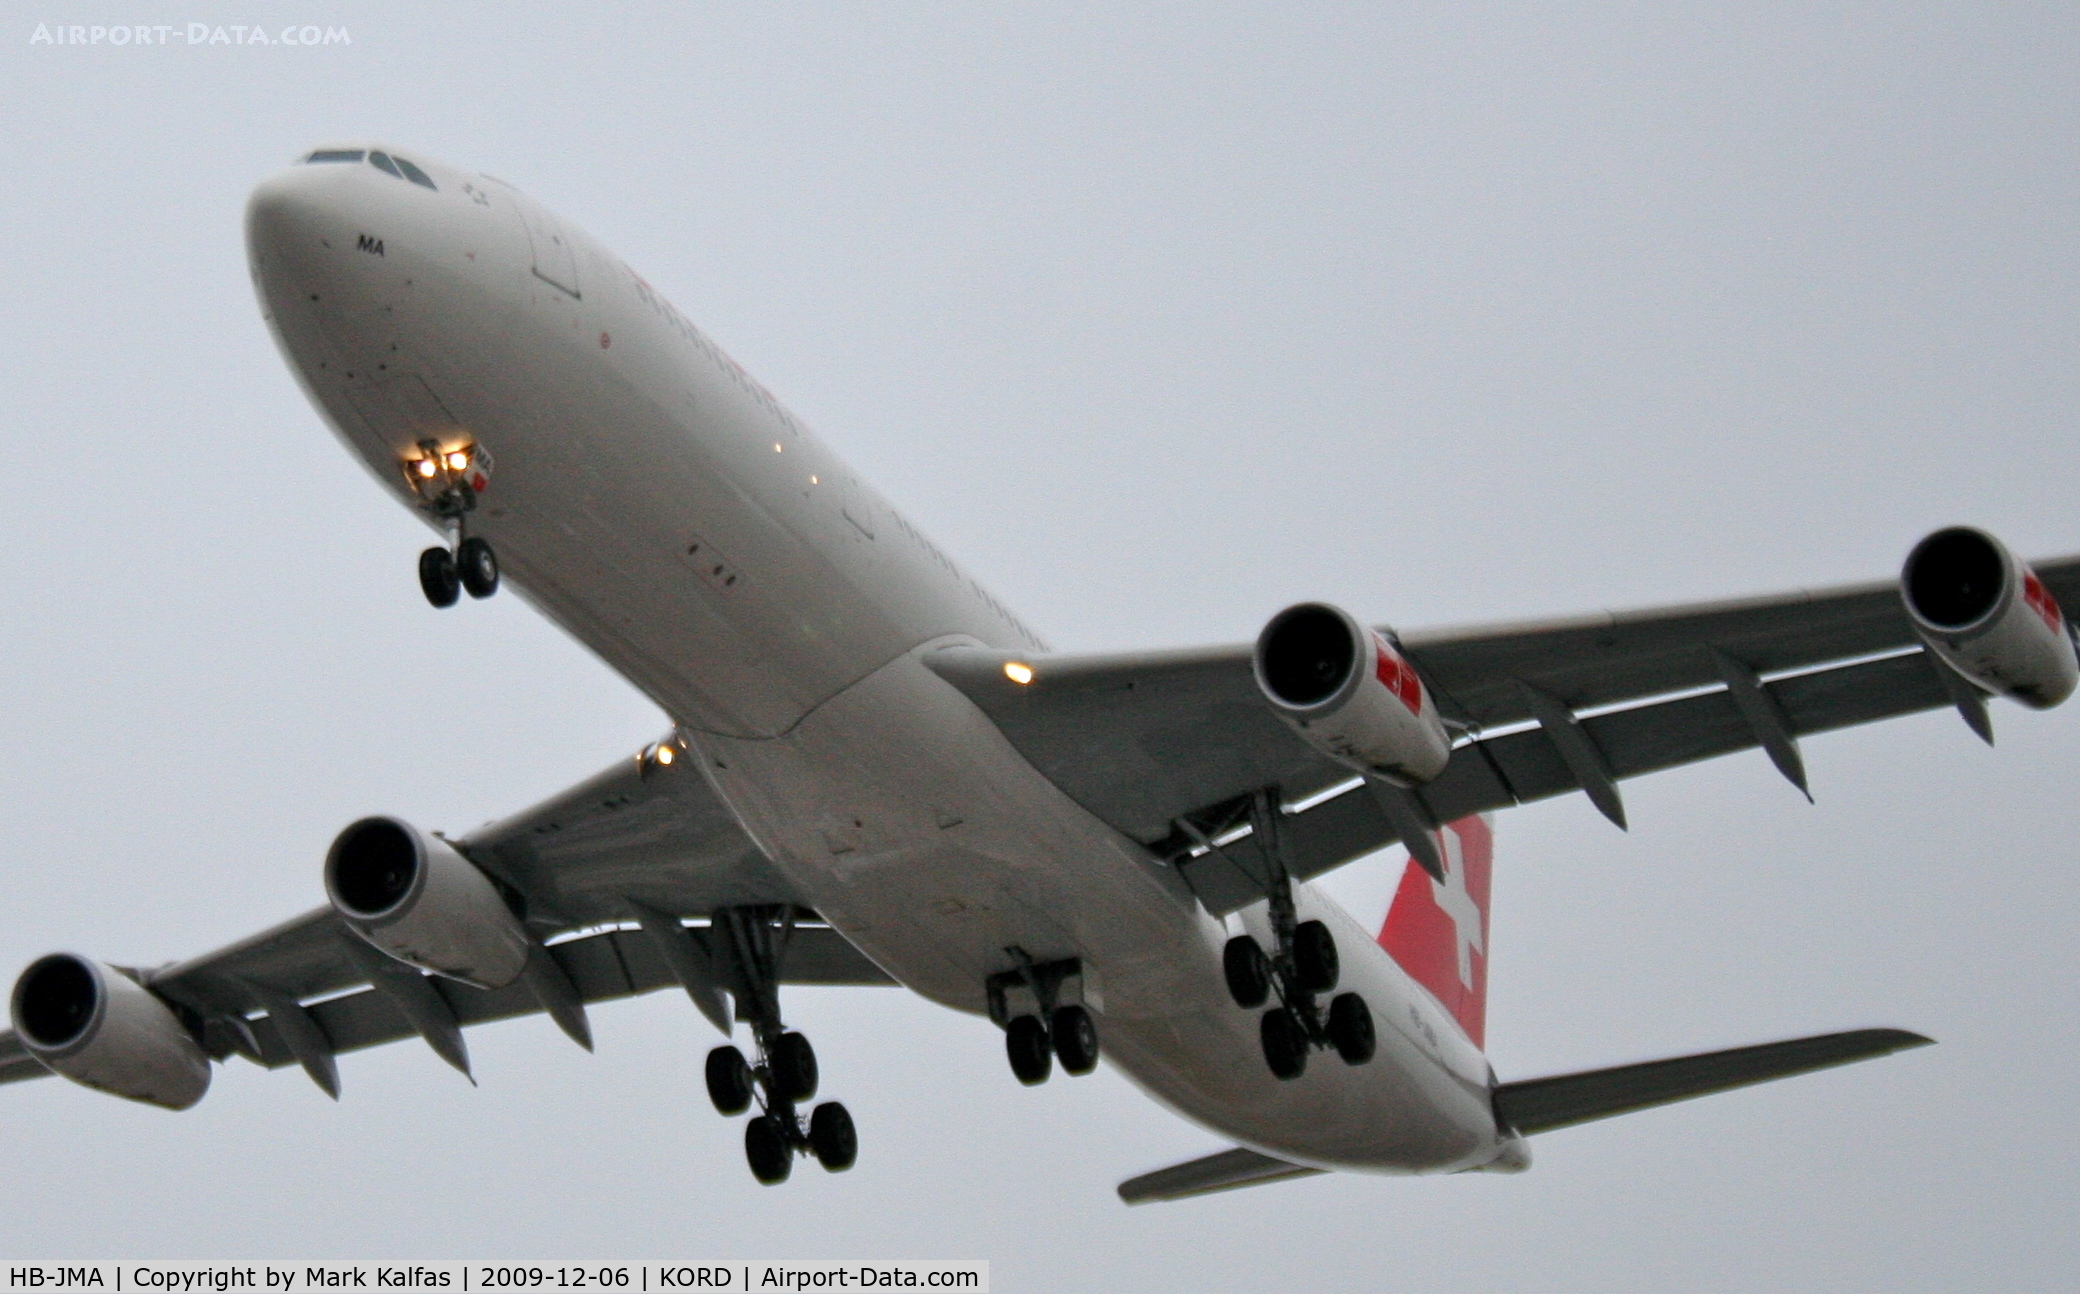 HB-JMA, 2003 Airbus A340-313 C/N 538, Swissair A340-313, SWR84T arriving from LSZH (Zurich) on 27L.